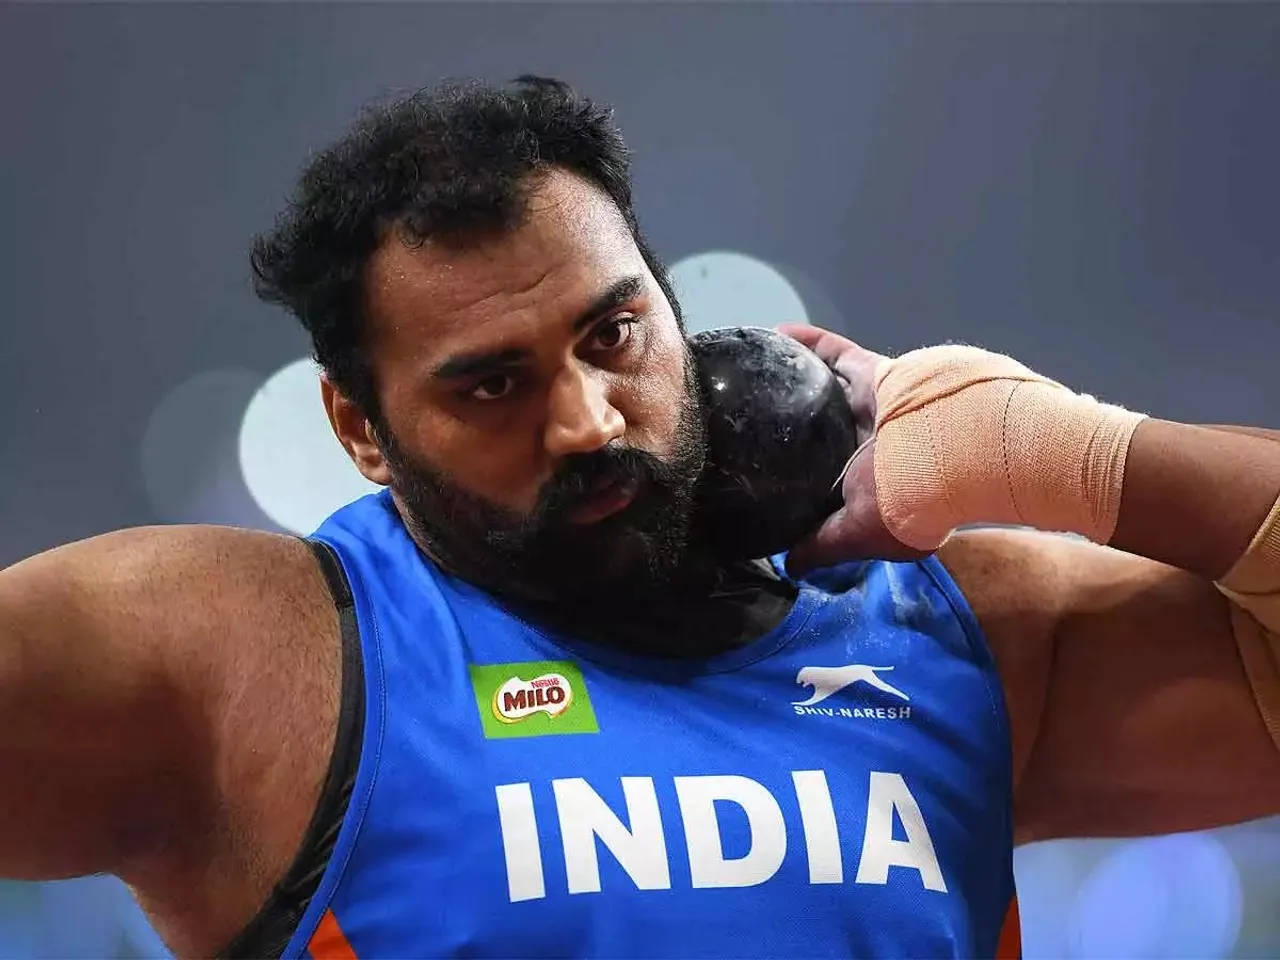 Inter-State Athletics 2023: Tajinderpal Singh Toor breaks Asian record to qualify for the World Championships | Sportz Point